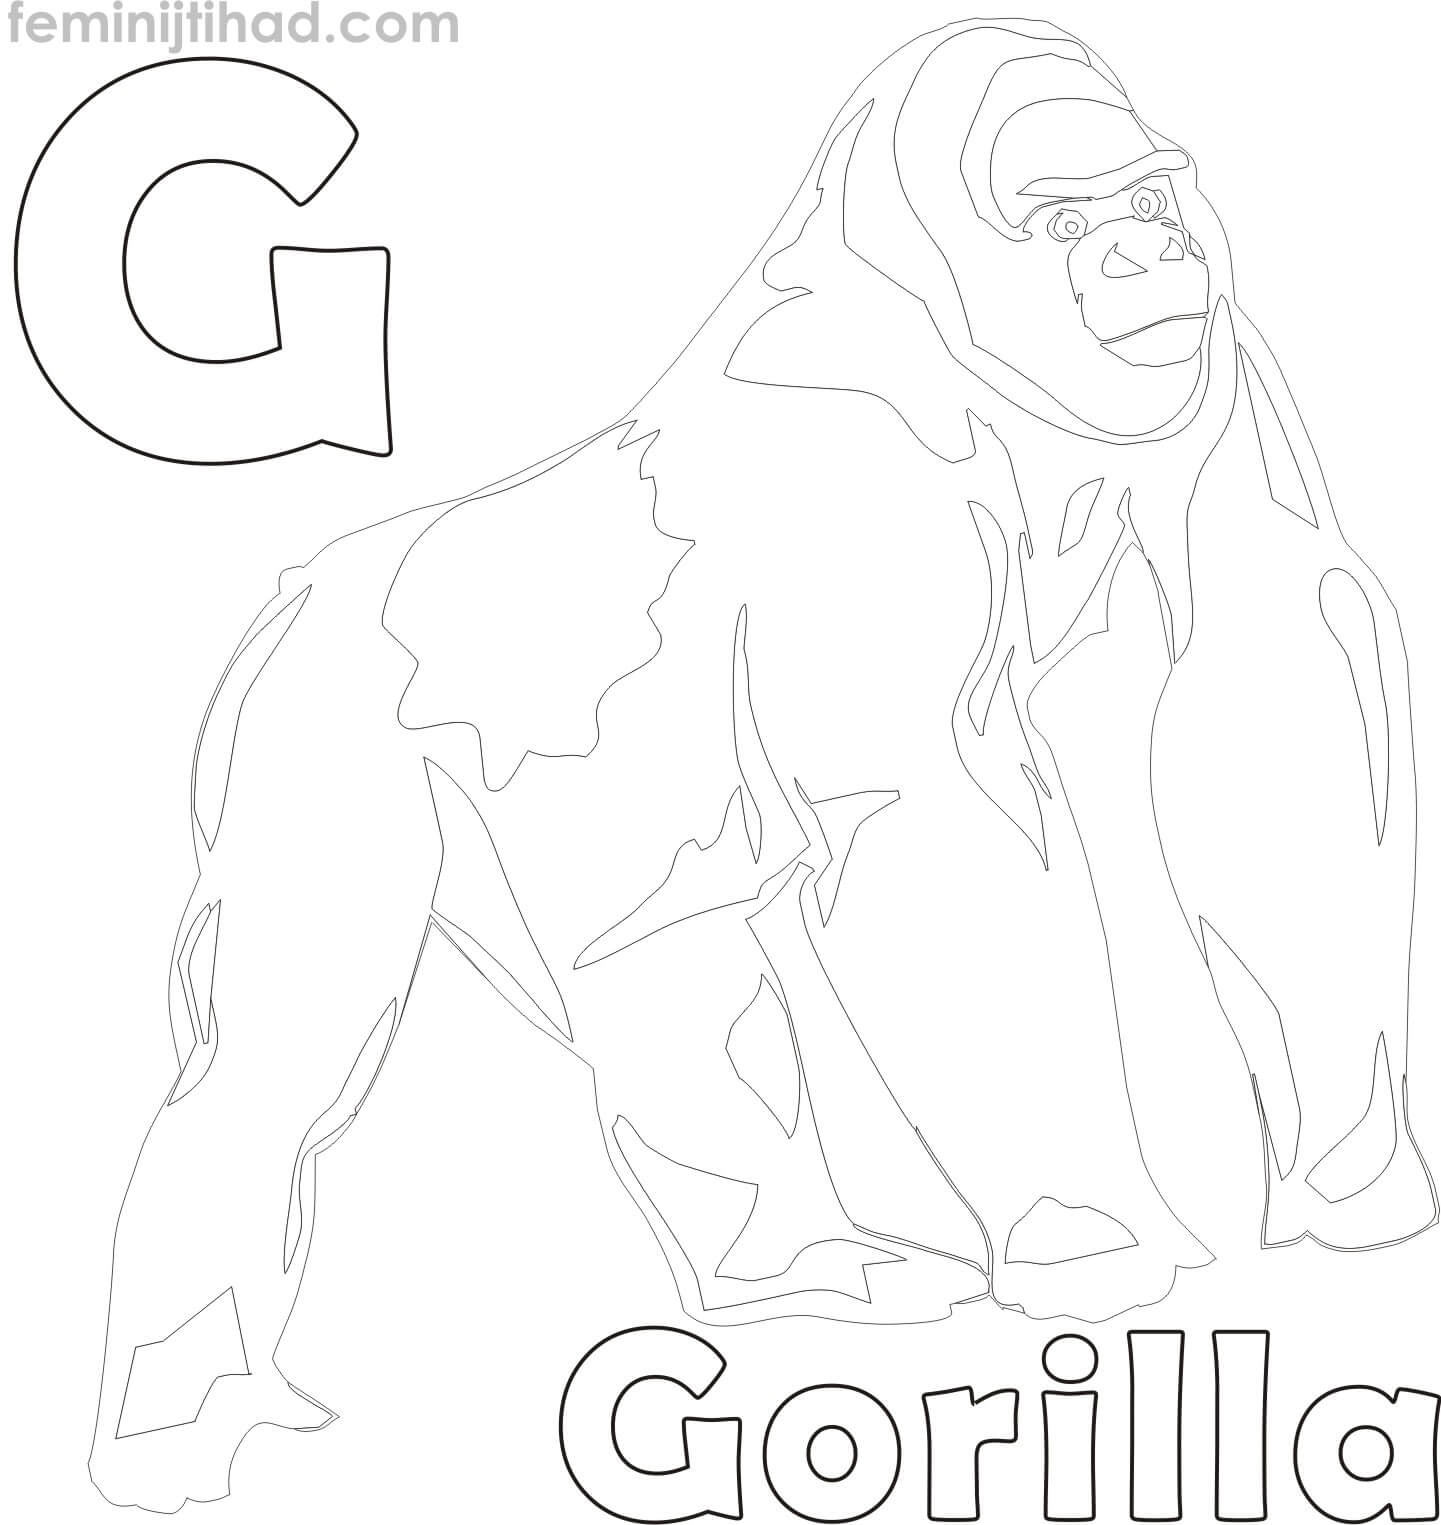 free coloring page of a gorilla